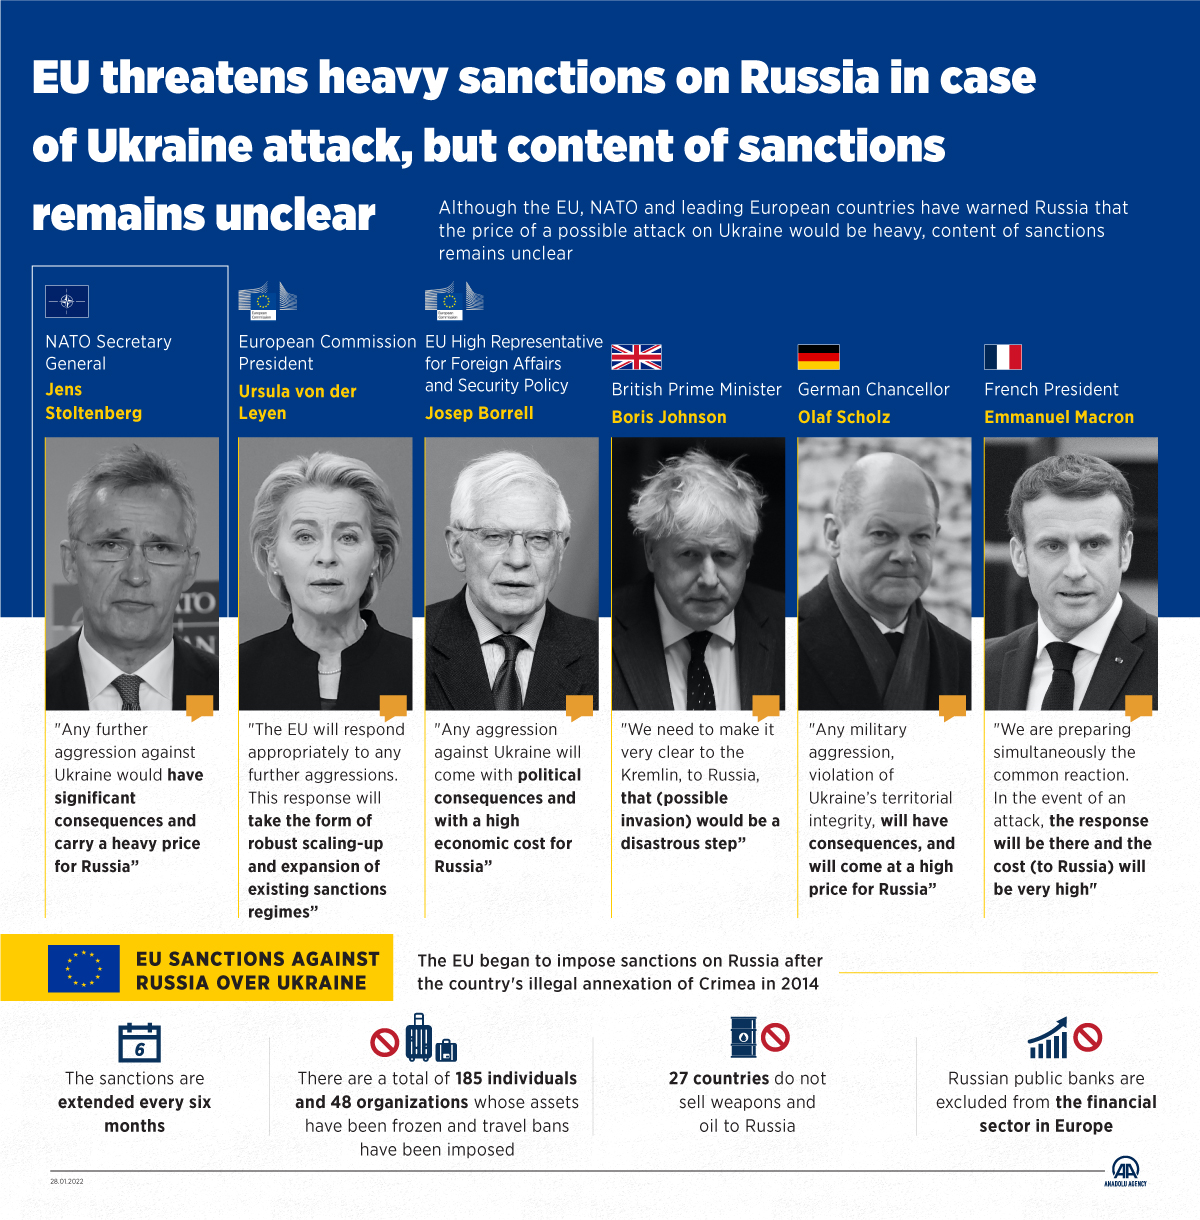 EU threatens heavy sanctions on Russia in case of Ukraine attack, but contents of sanctions remain unclear